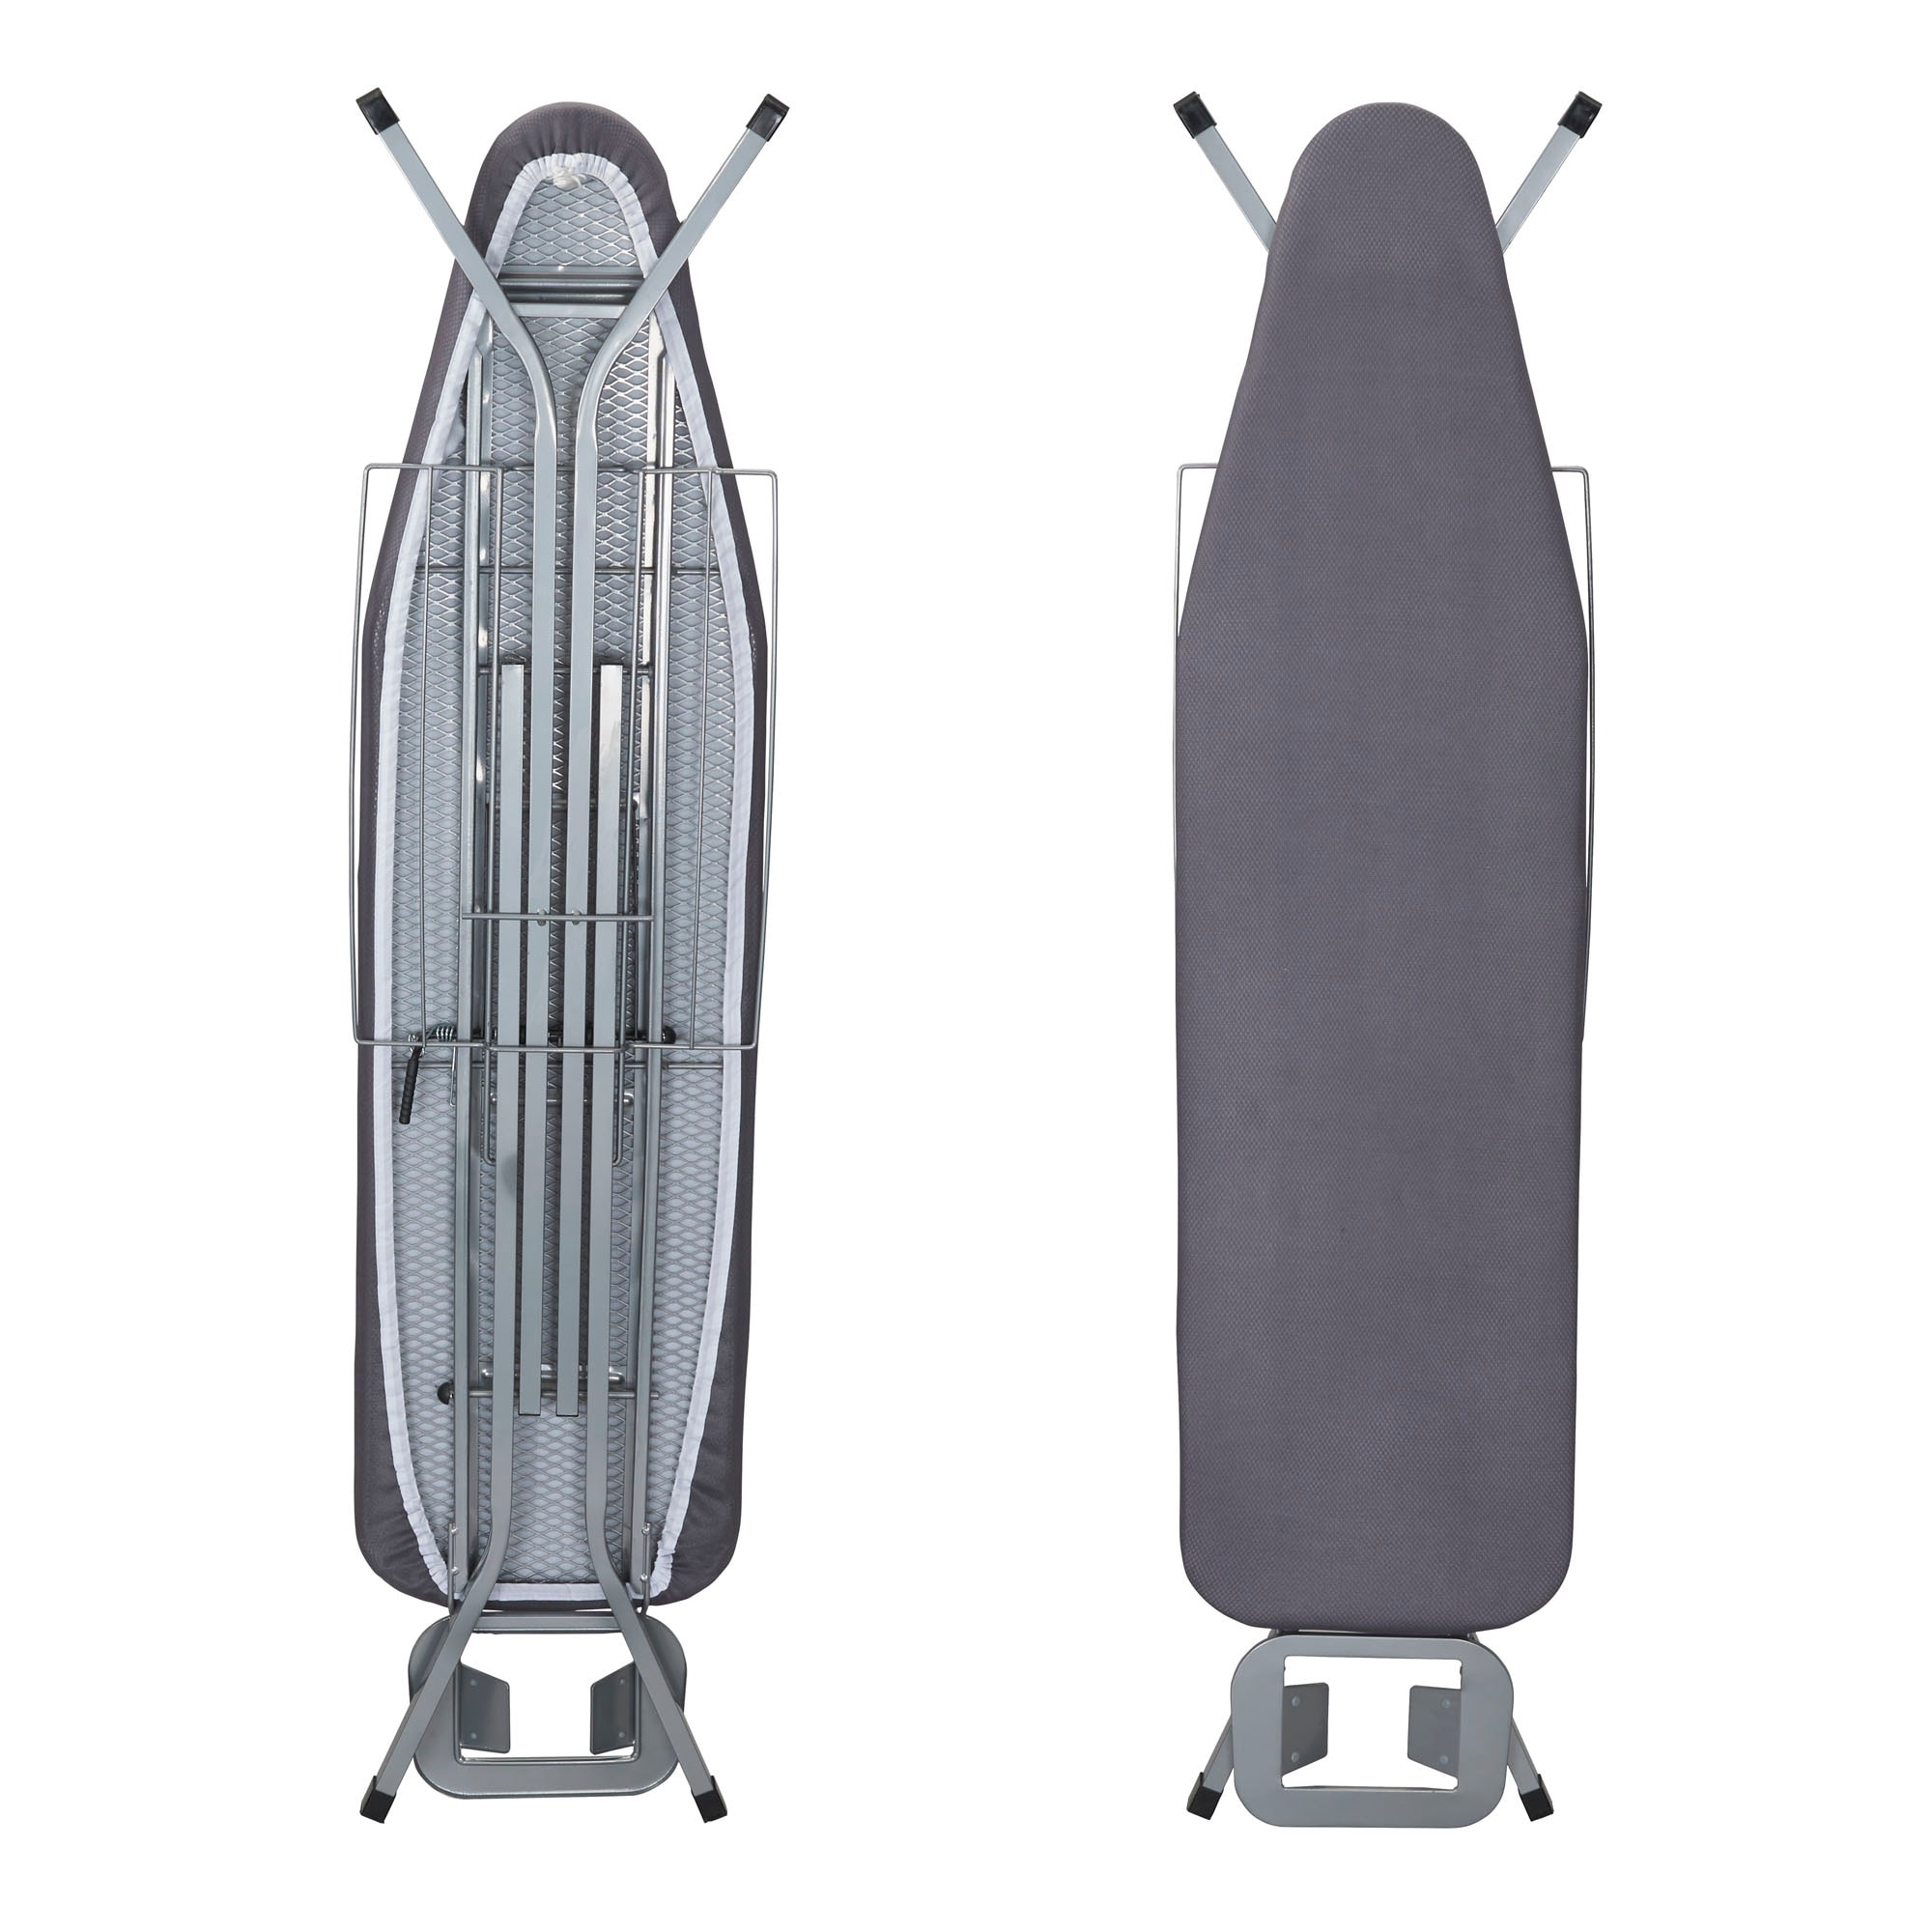 Ironing Board with Mesh Steel Top in Matte Black